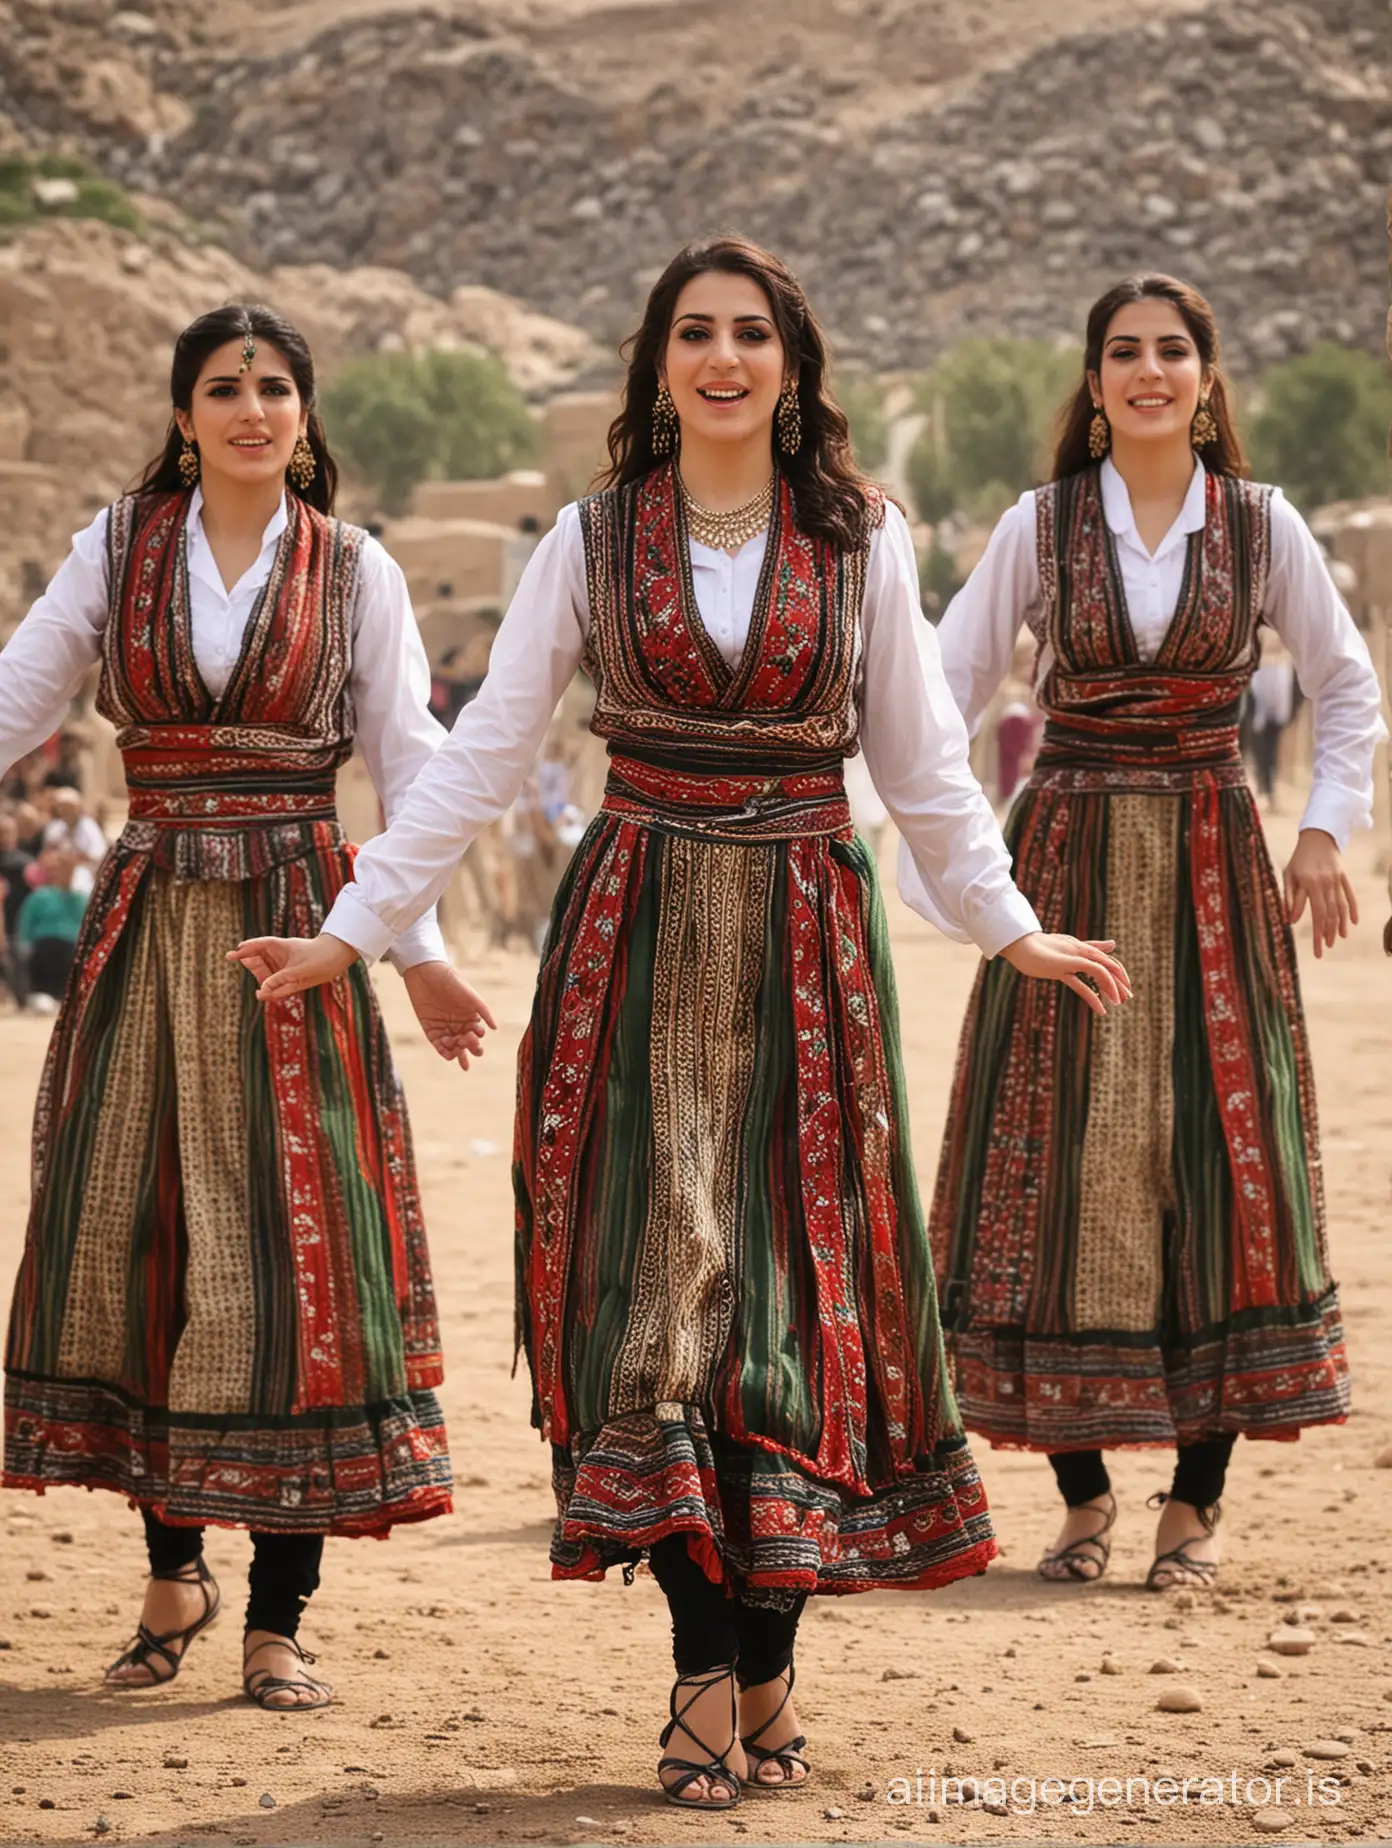 Vibrant-Kurdish-Dance-Group-Performing-Traditional-Dance-from-Iran